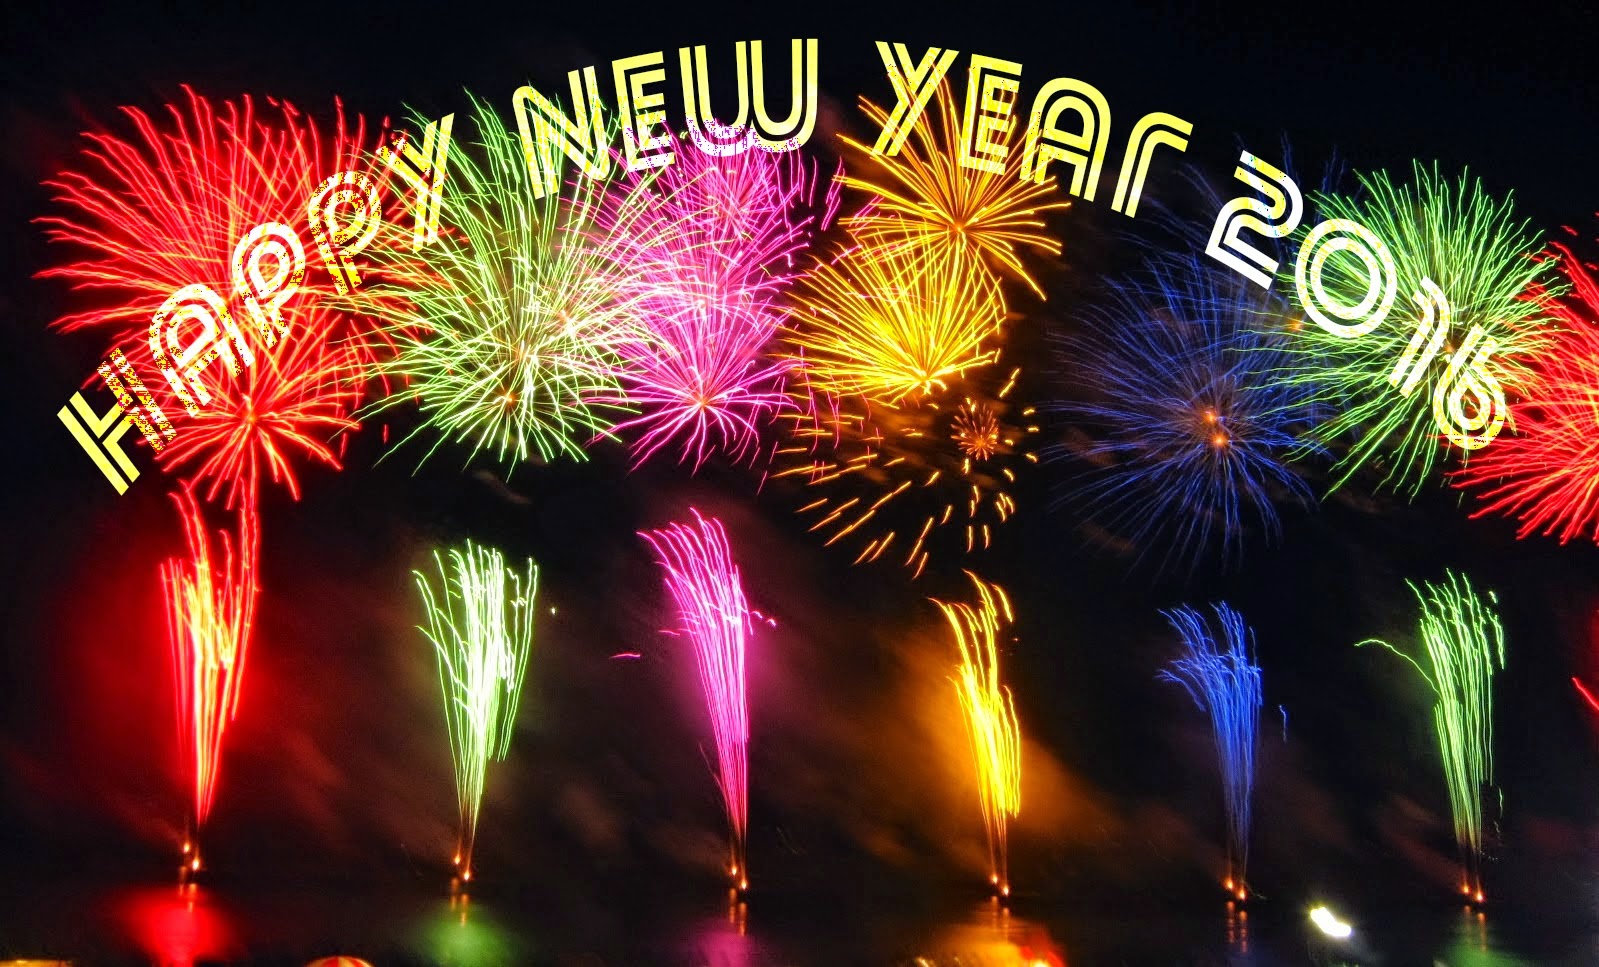  New Year 2016 ImagesNew Year Wishes 2016New Years Eve 2016New Year 1599x967